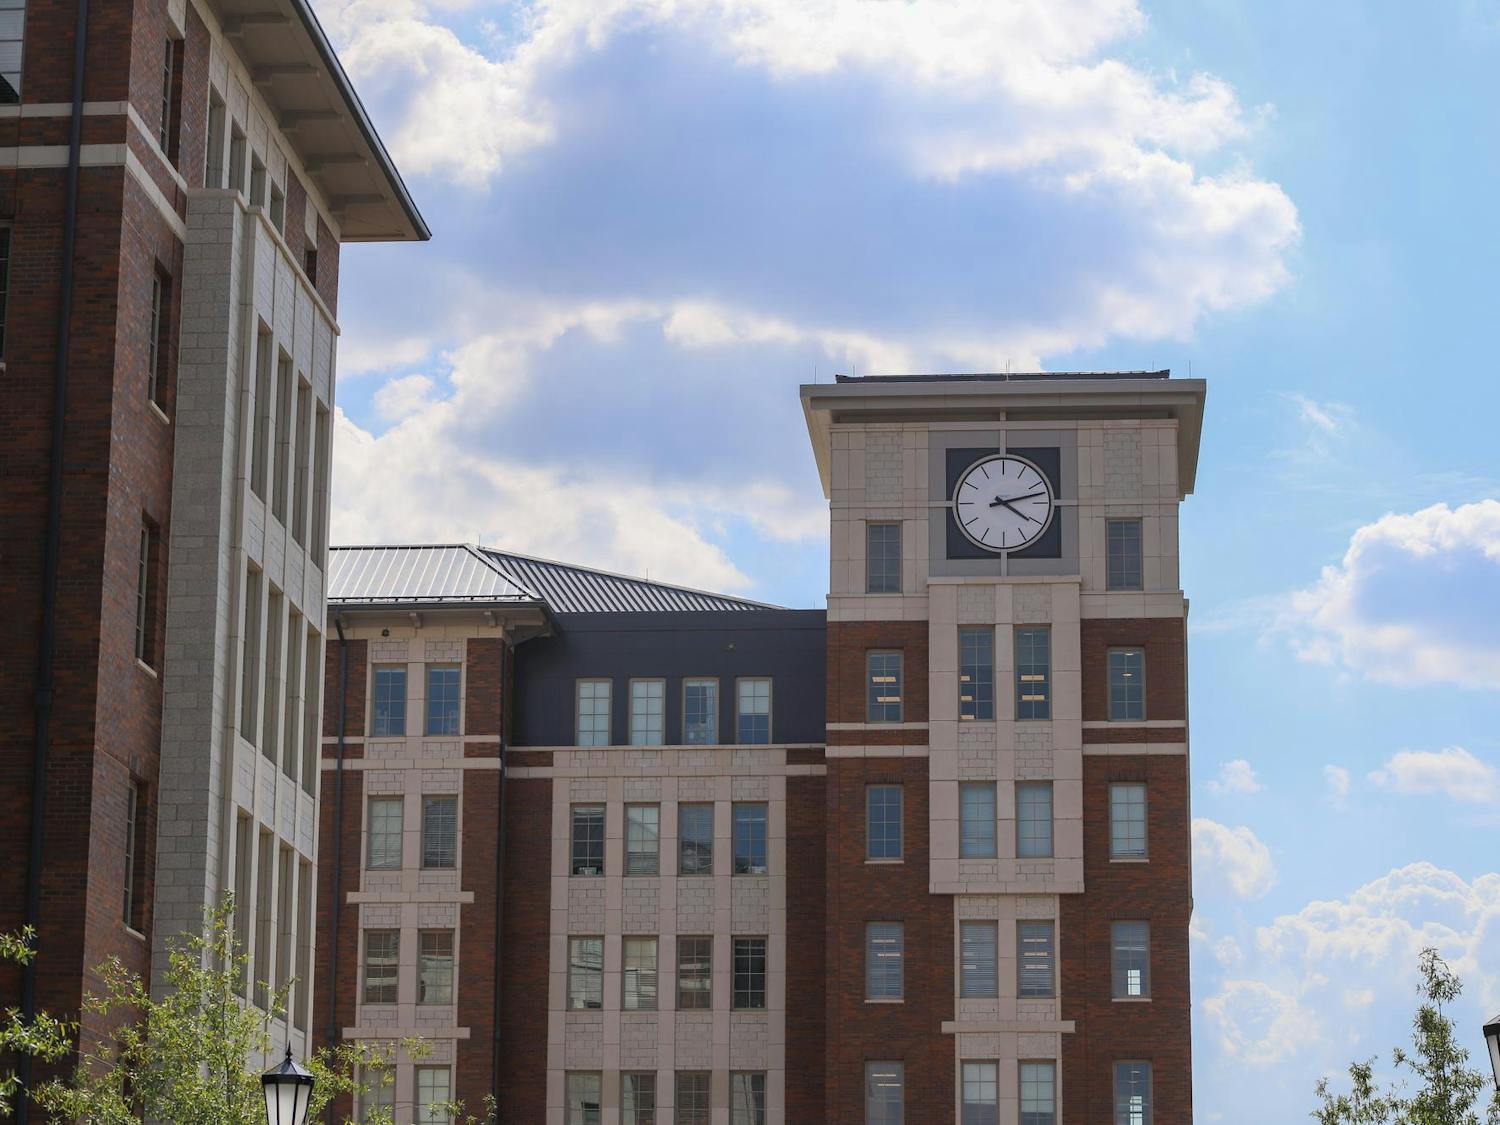 The University of South Carolina's latest residential development, Campus Village, opened on Aug. 18. The largest building project in the university's 222-year existence, the development's construction started in May 2019 and cost $240 million to build. Campus Village is made up of four modern buildings housing 1,800 total students, as well as commercial, retail and educational amenities.